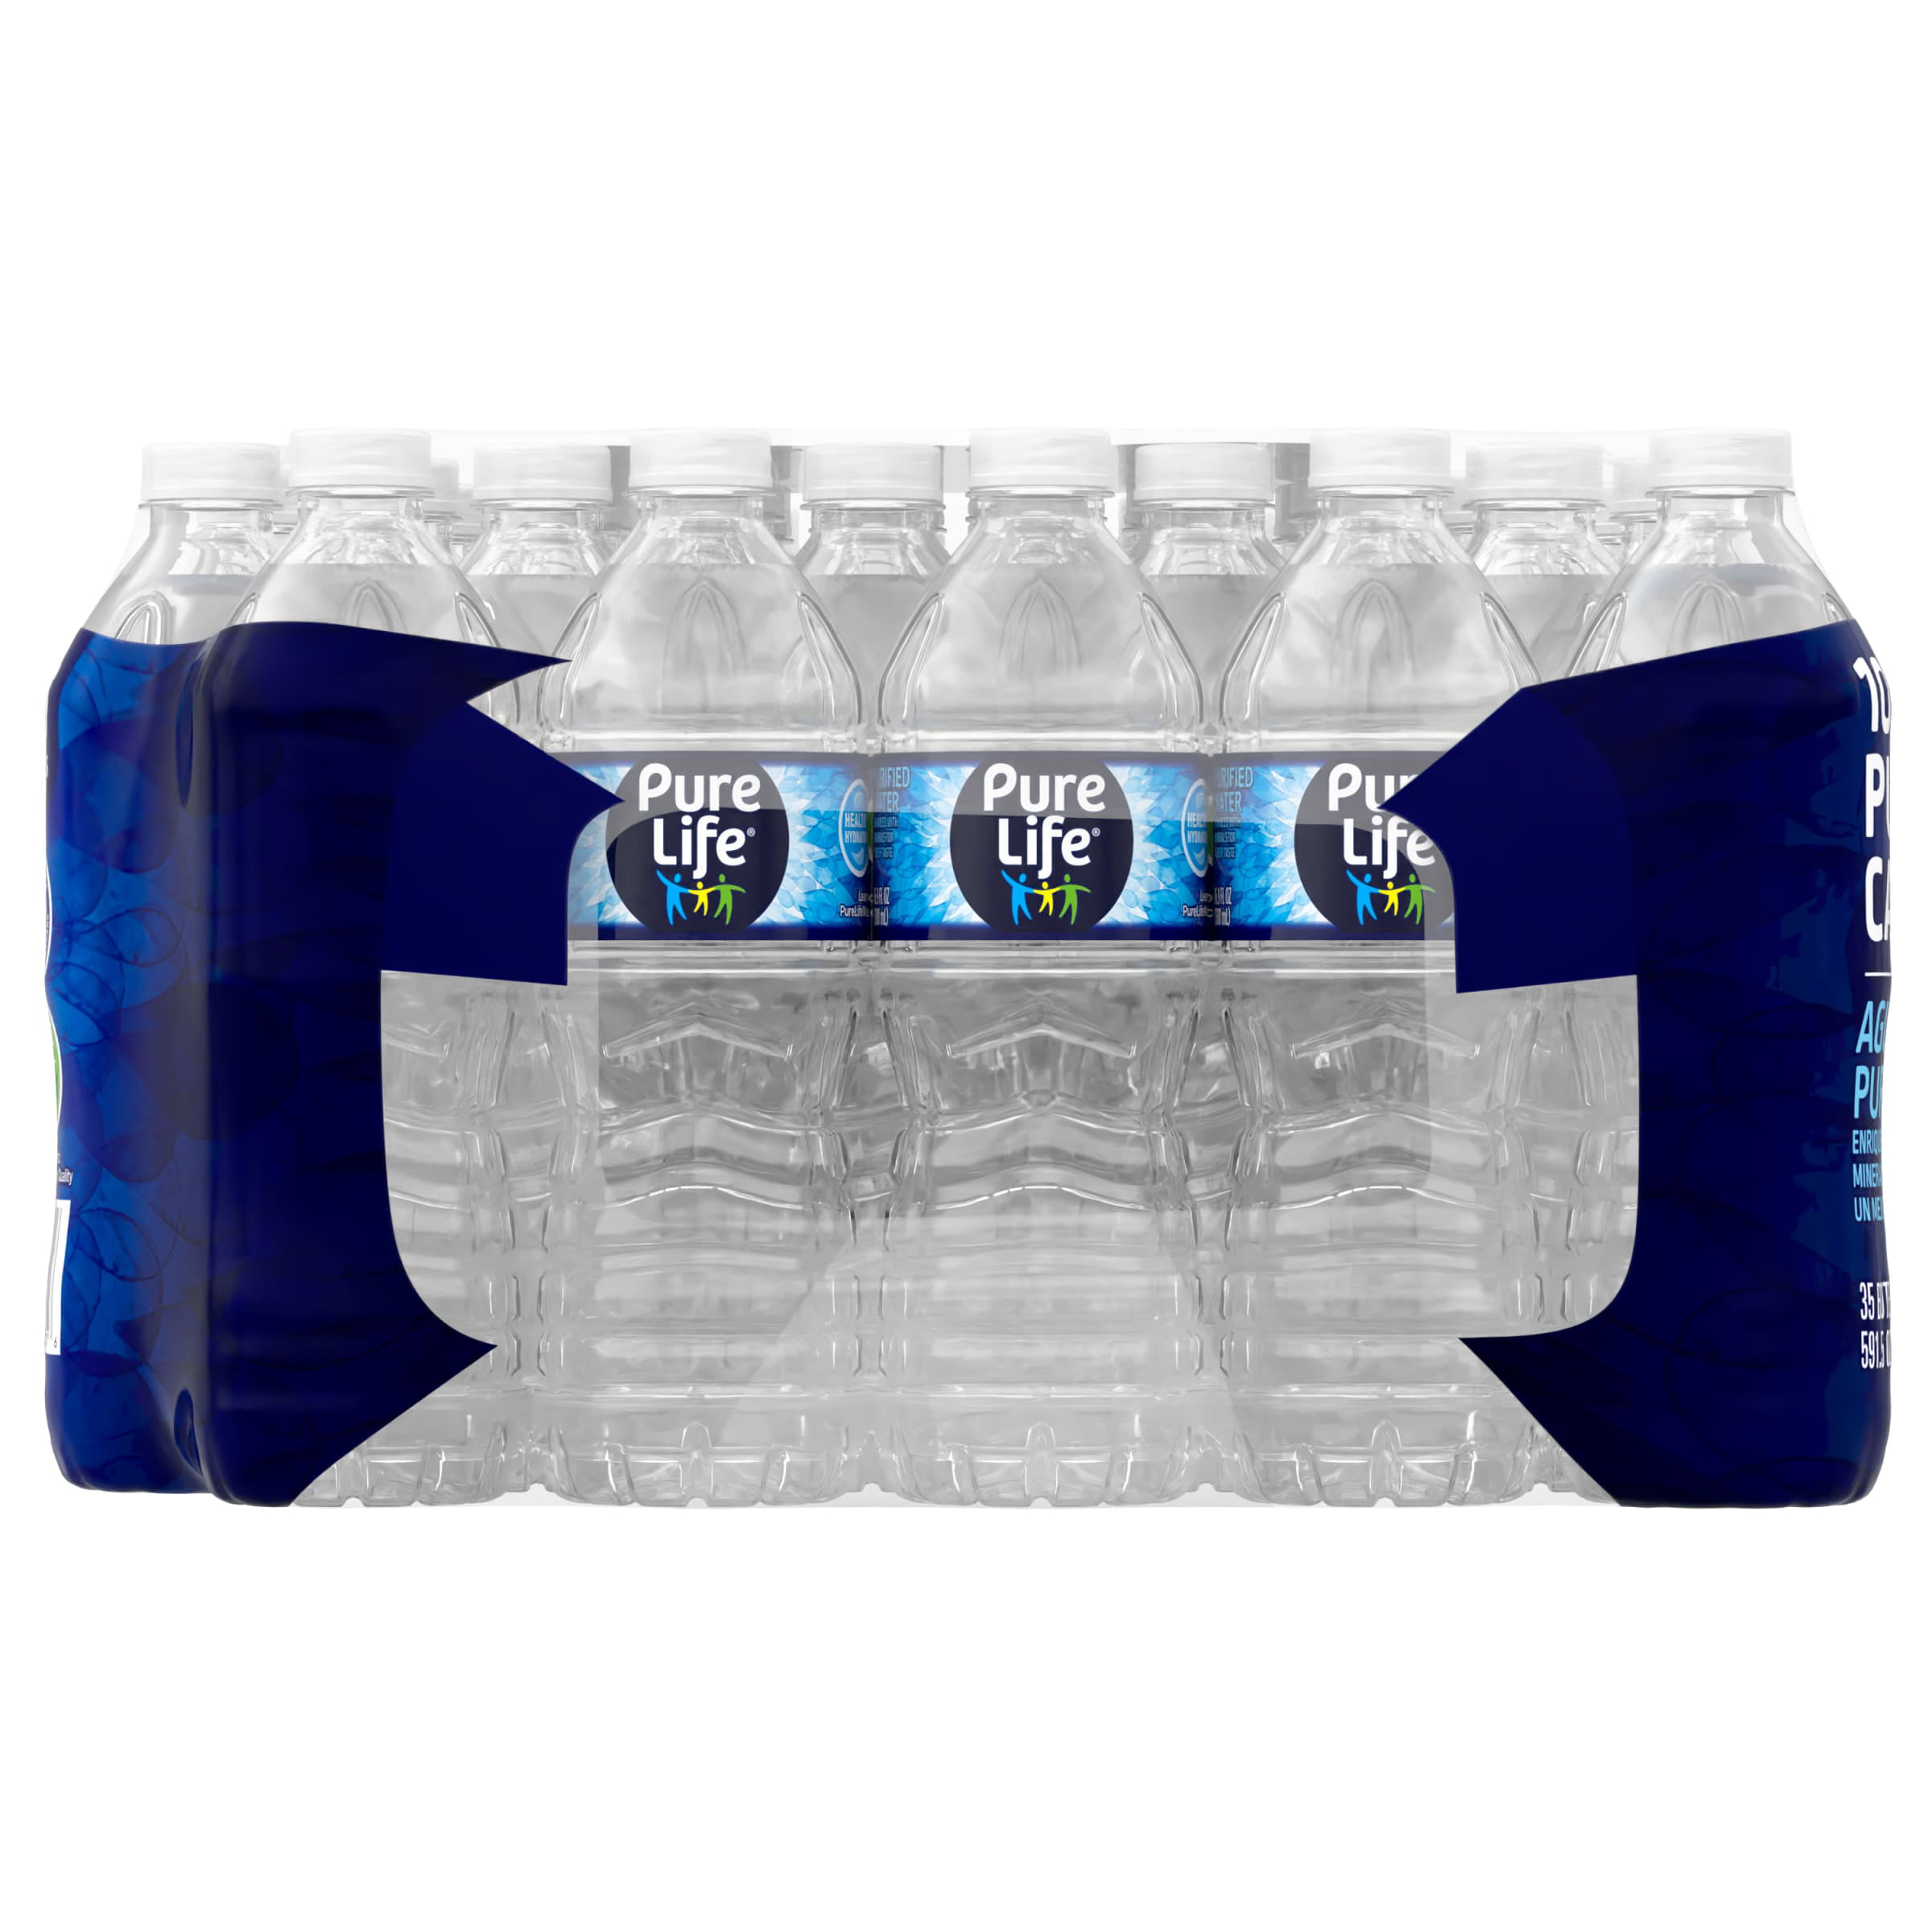 35-pack Pure Life purified water bottles